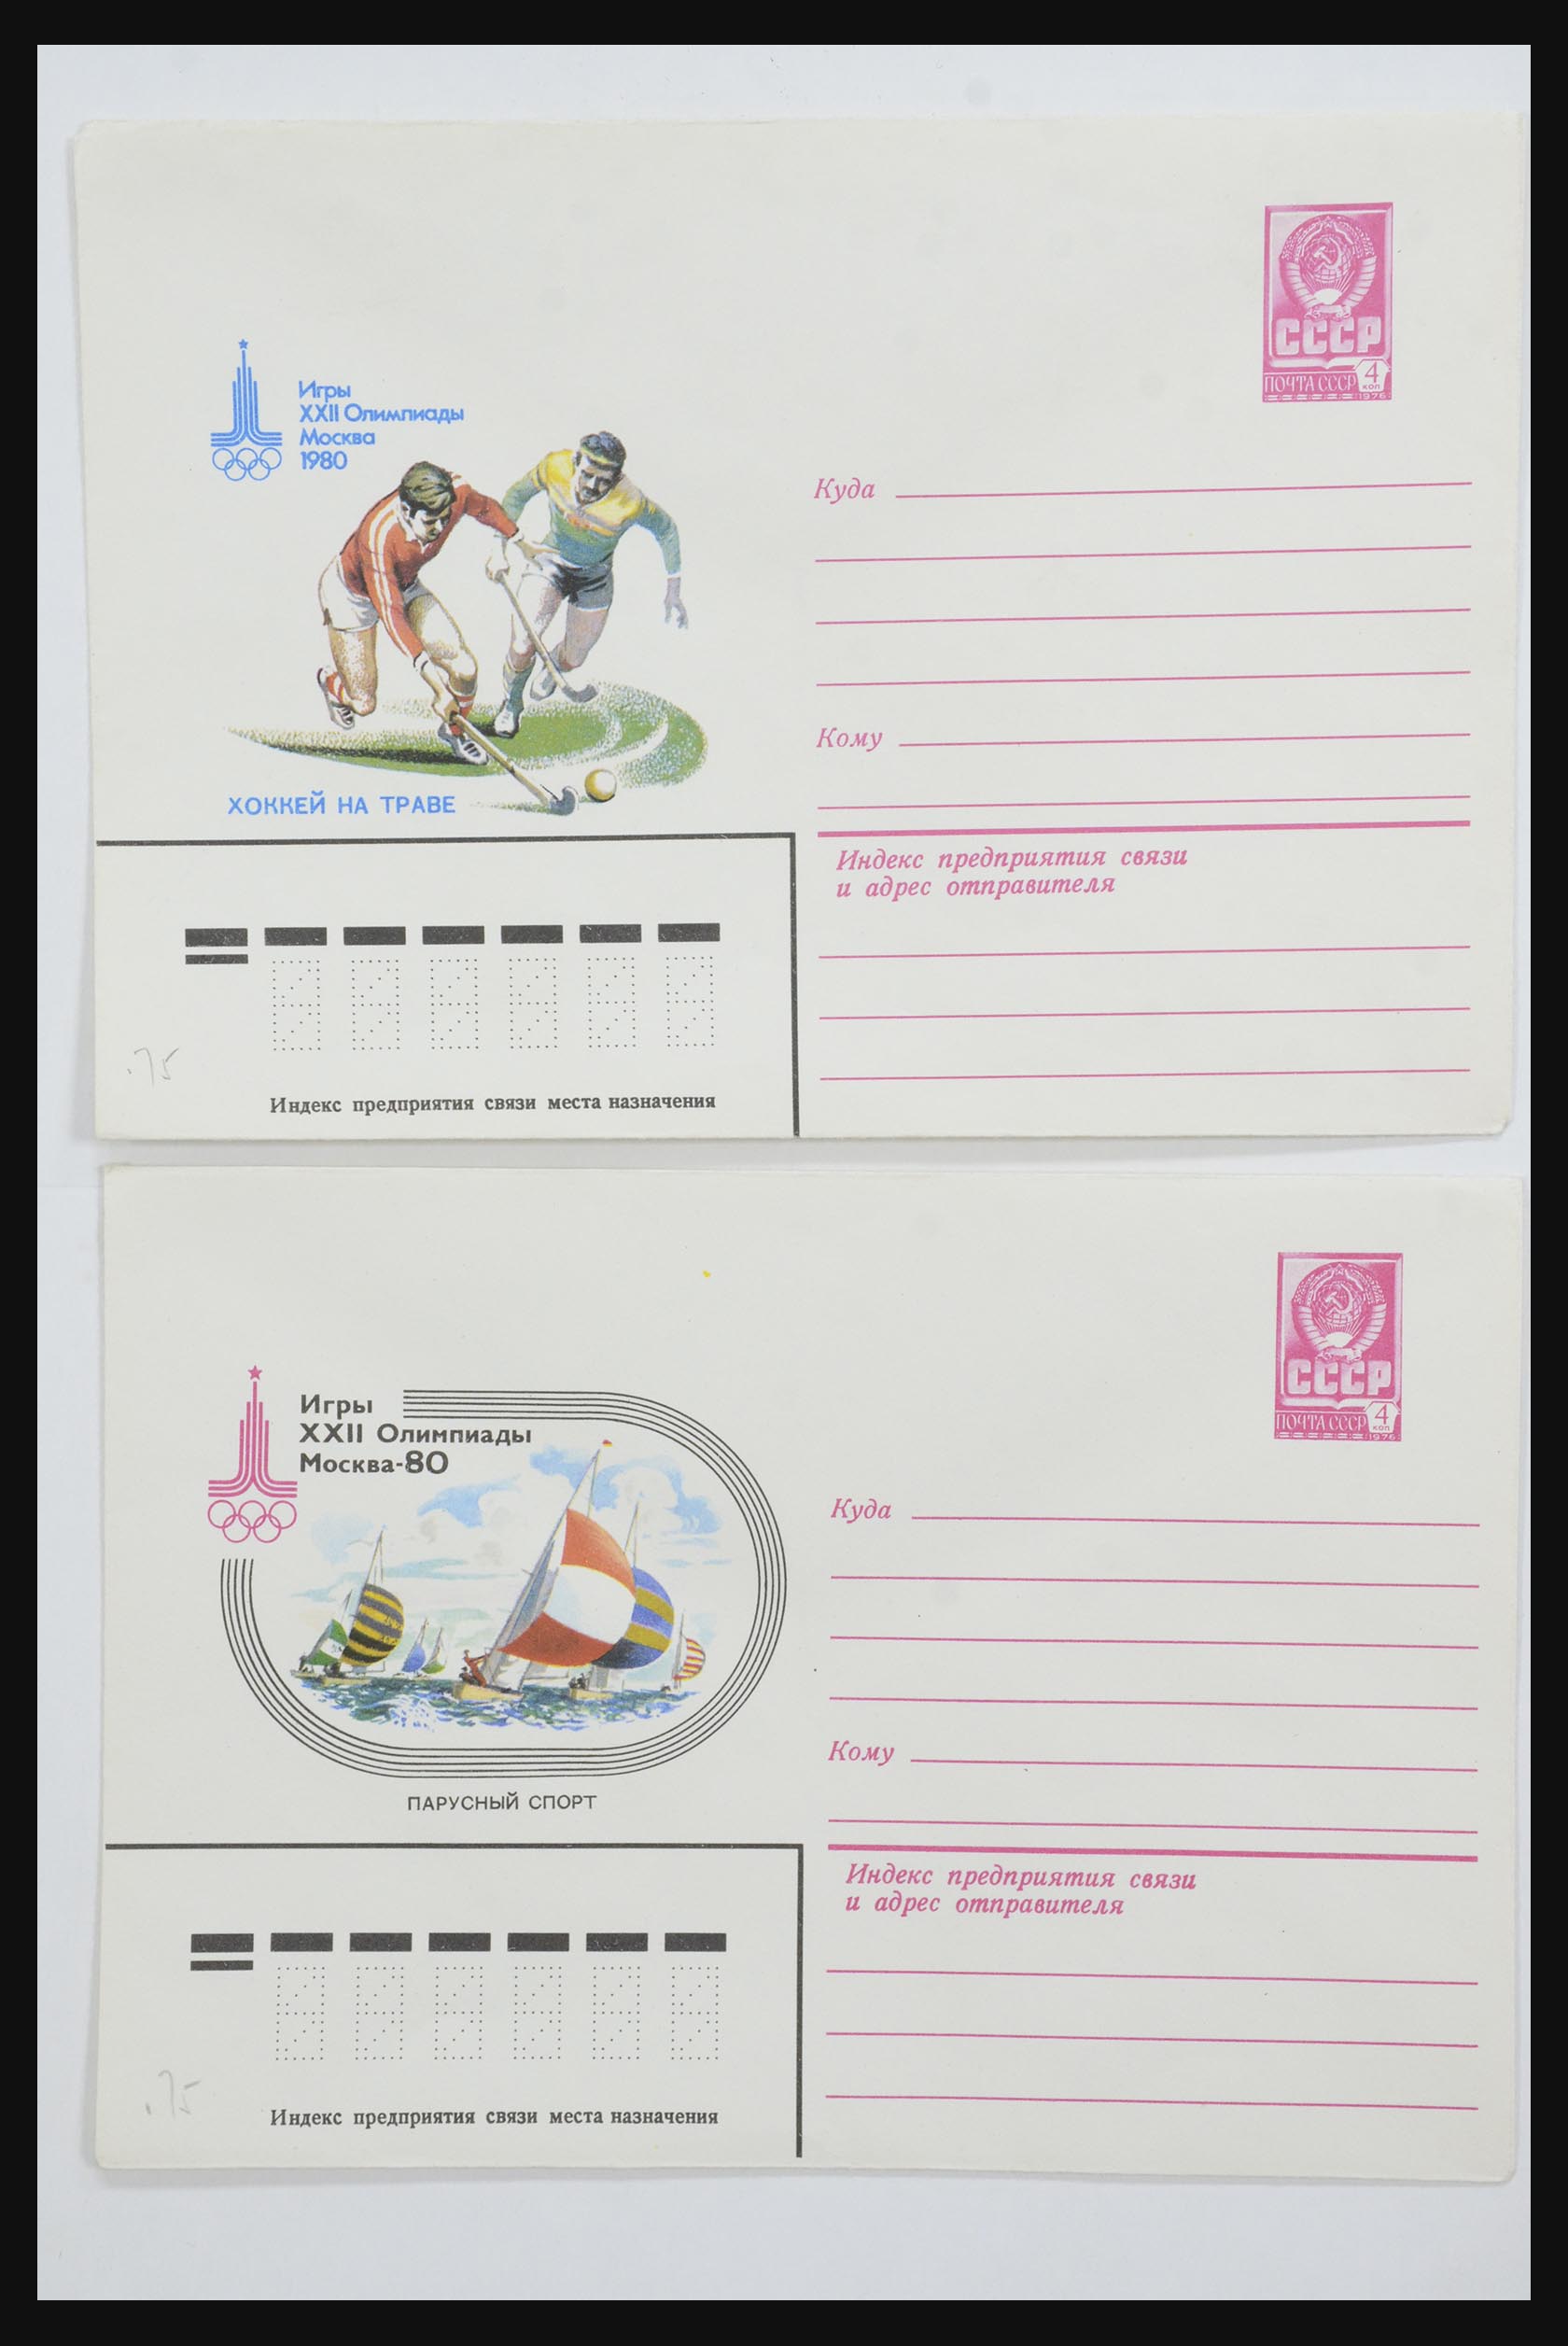 31928 0069 - 31928 Eastern Europe covers 1960's-1990's.